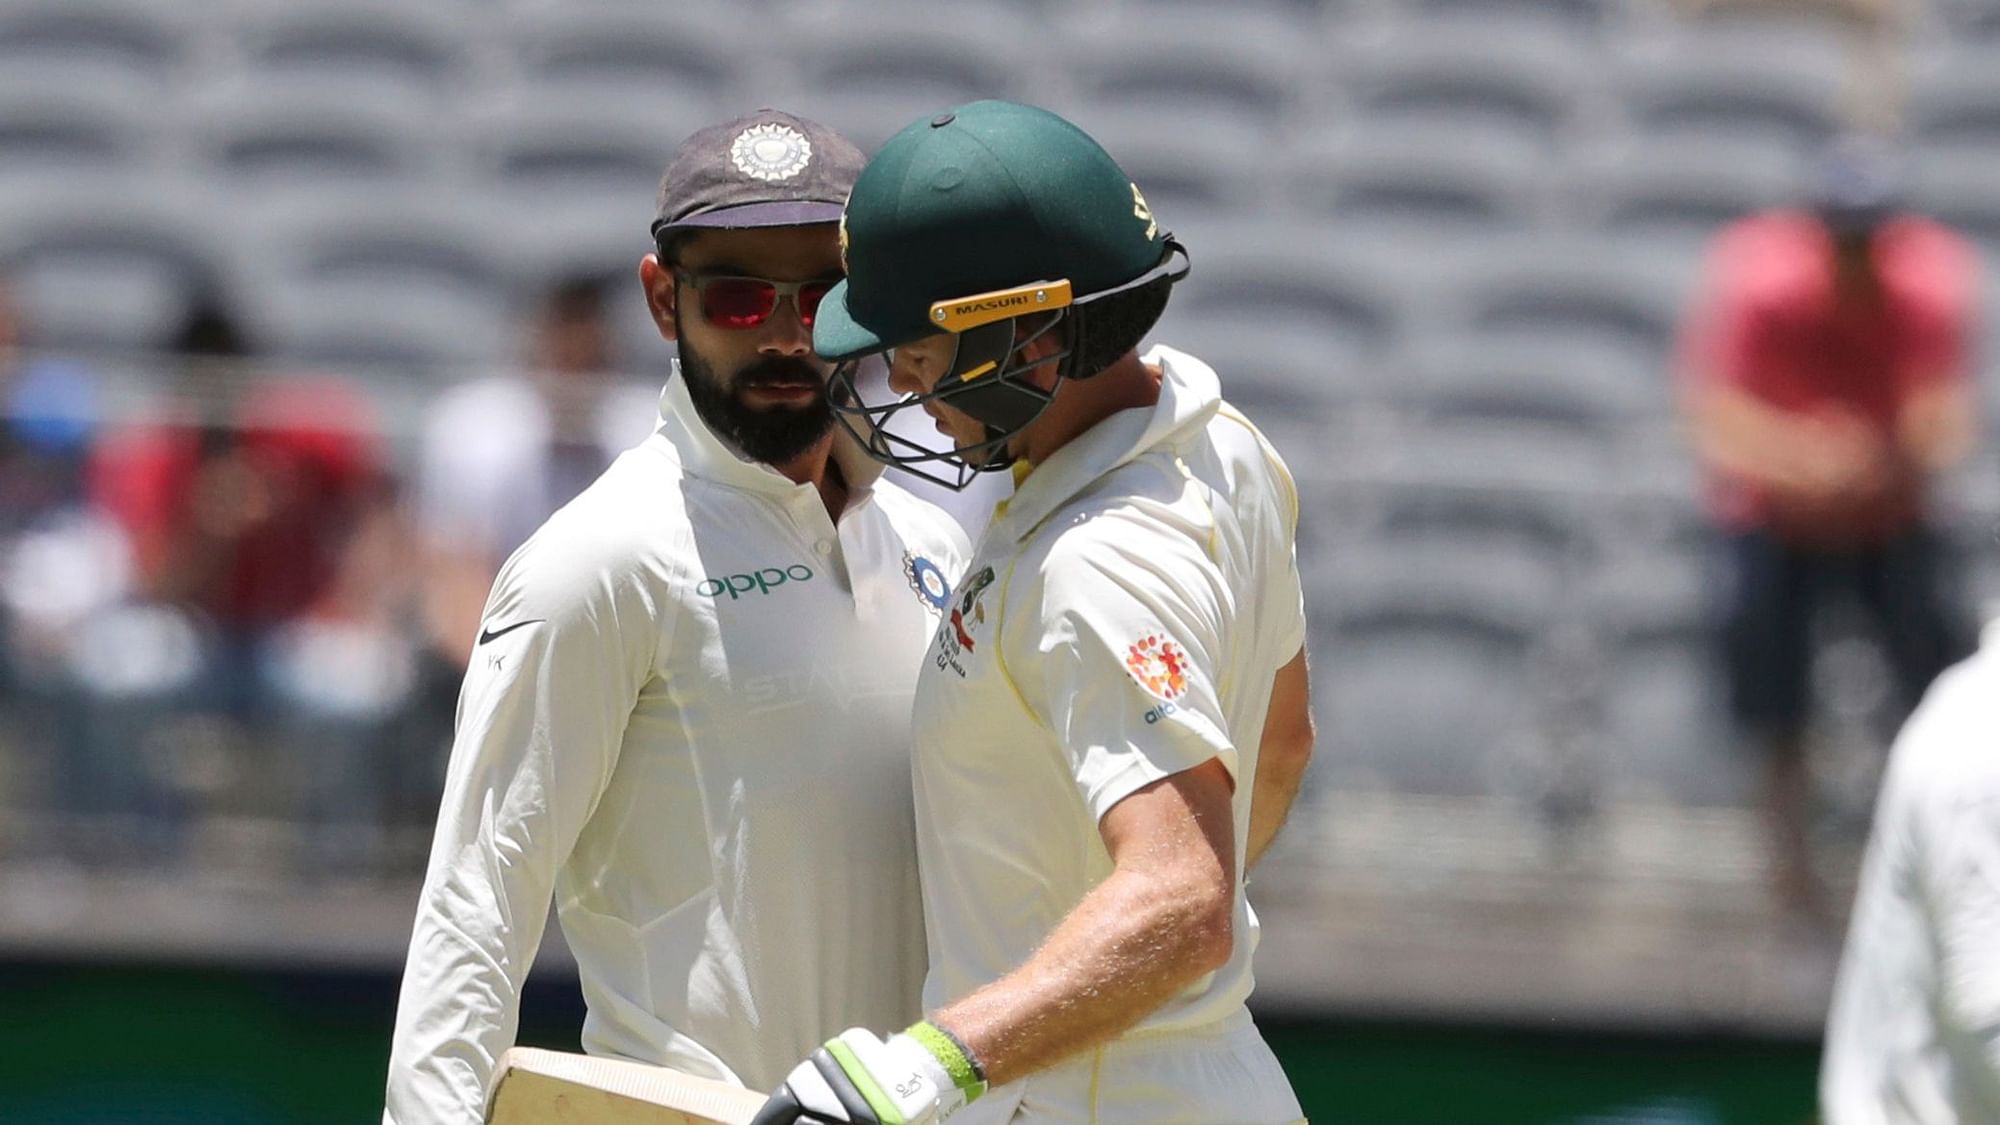 Opposing captains, India’s Virat Kohli, left, and Australia’s Tim Paine come face to face during play in the second cricket Test between Australia and India